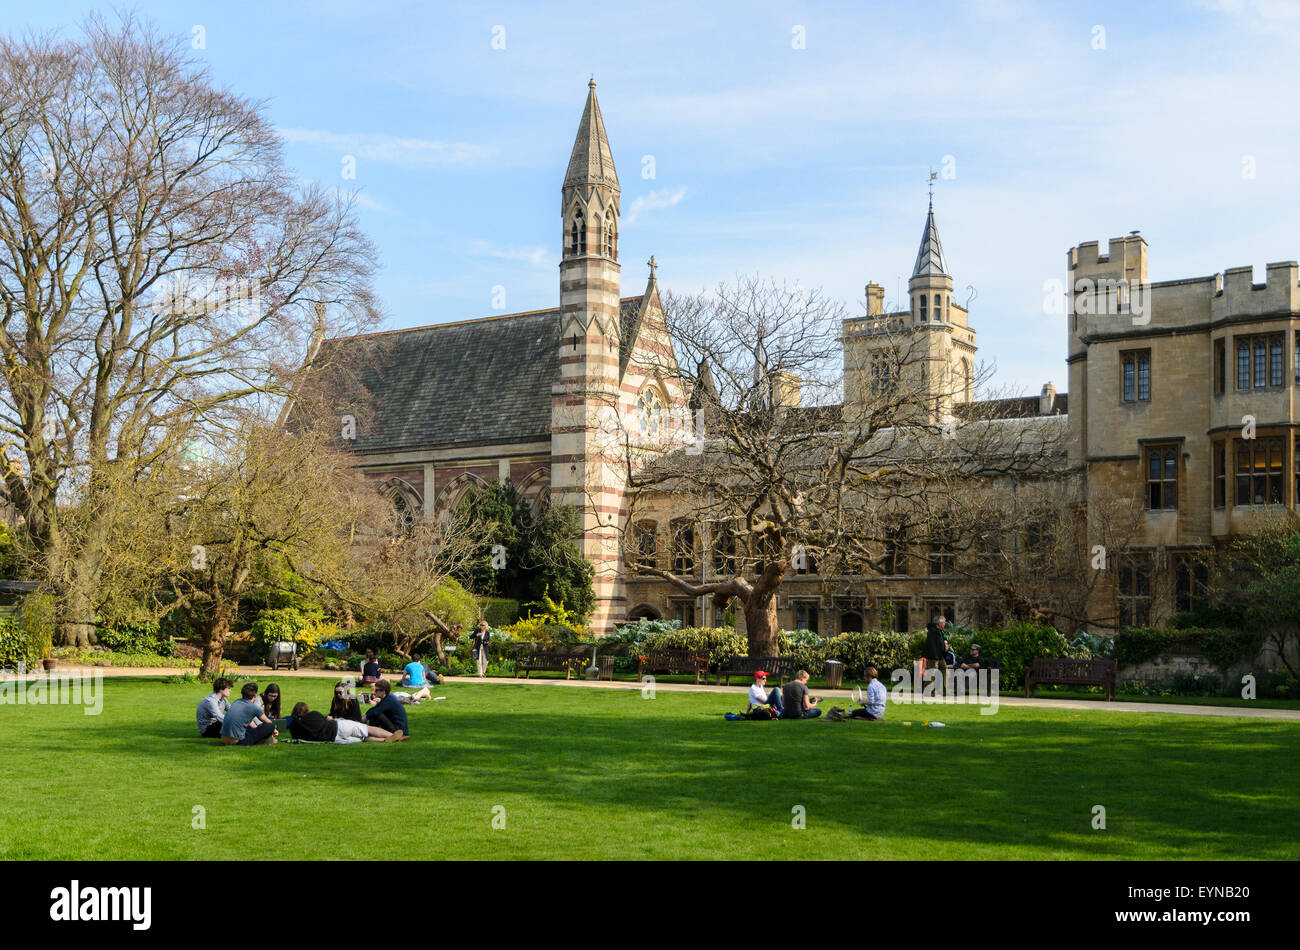 Students relaxing in the Garden Quadrangle, Balliol College, University of Oxford, Oxford, England, UK. Stock Photo